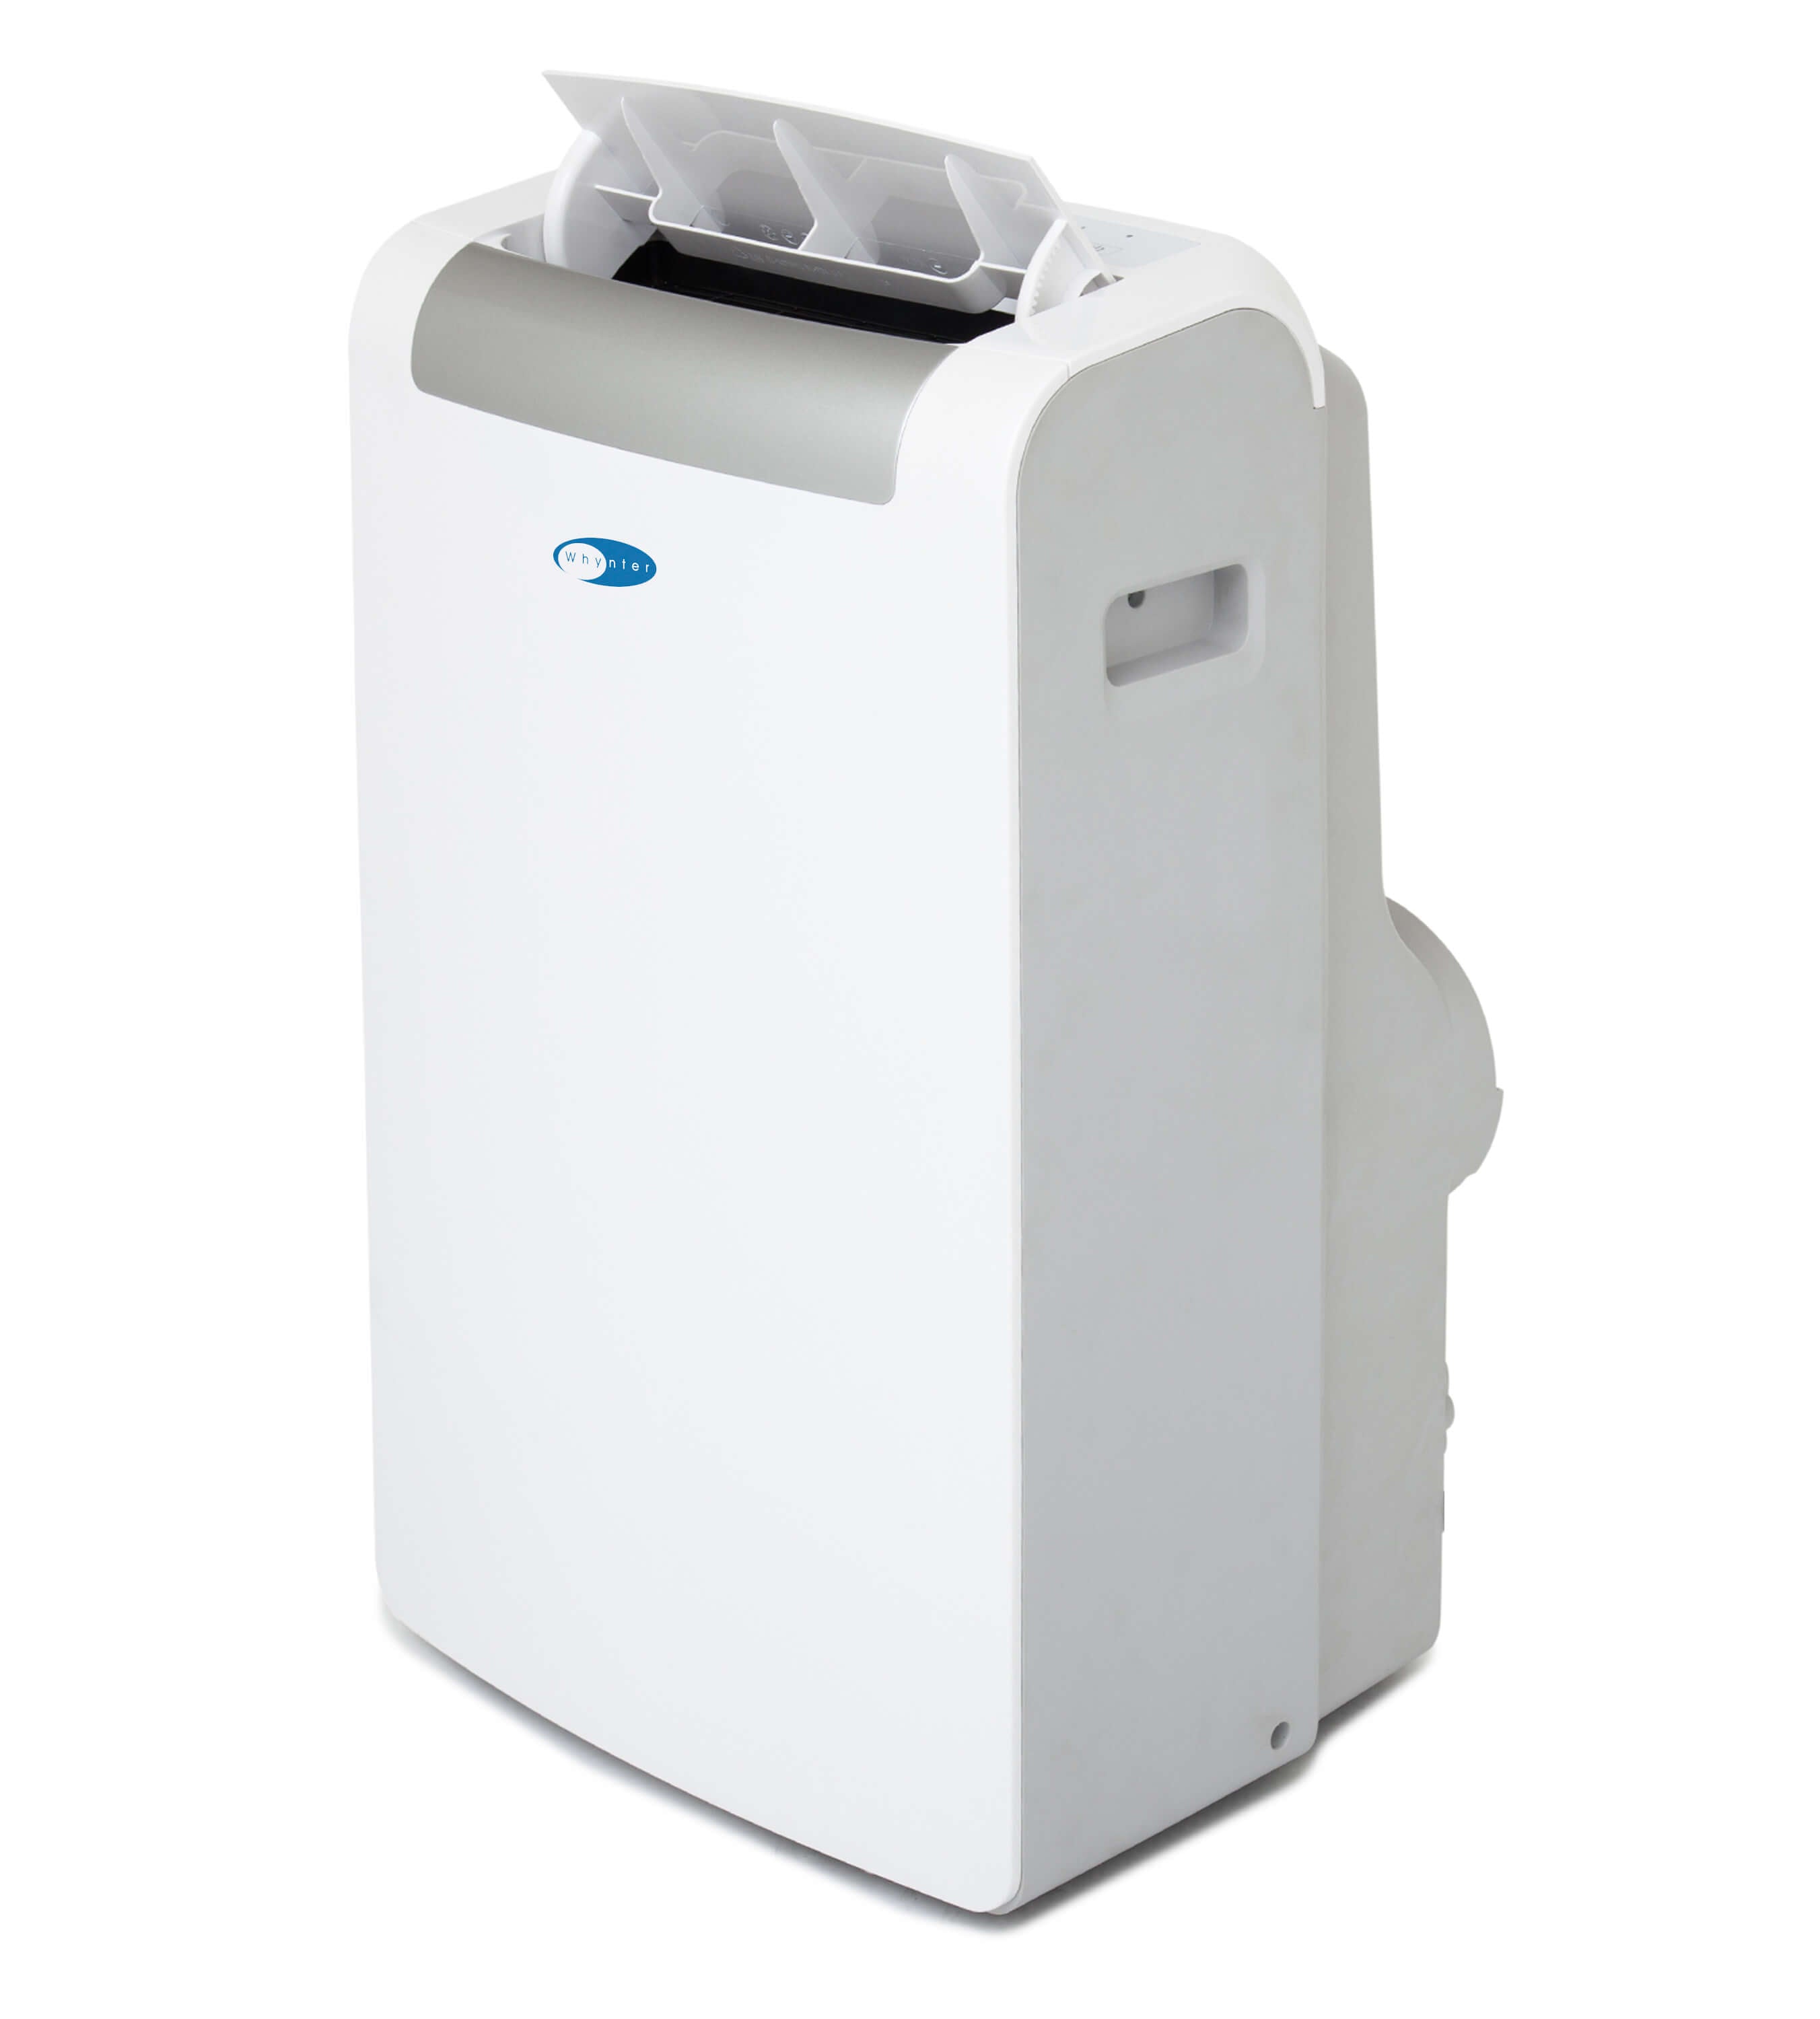 Whynter, Whynter ARC-148MHP Portable Air Conditioner Heater 14,000 BTU with Dehumidifier New